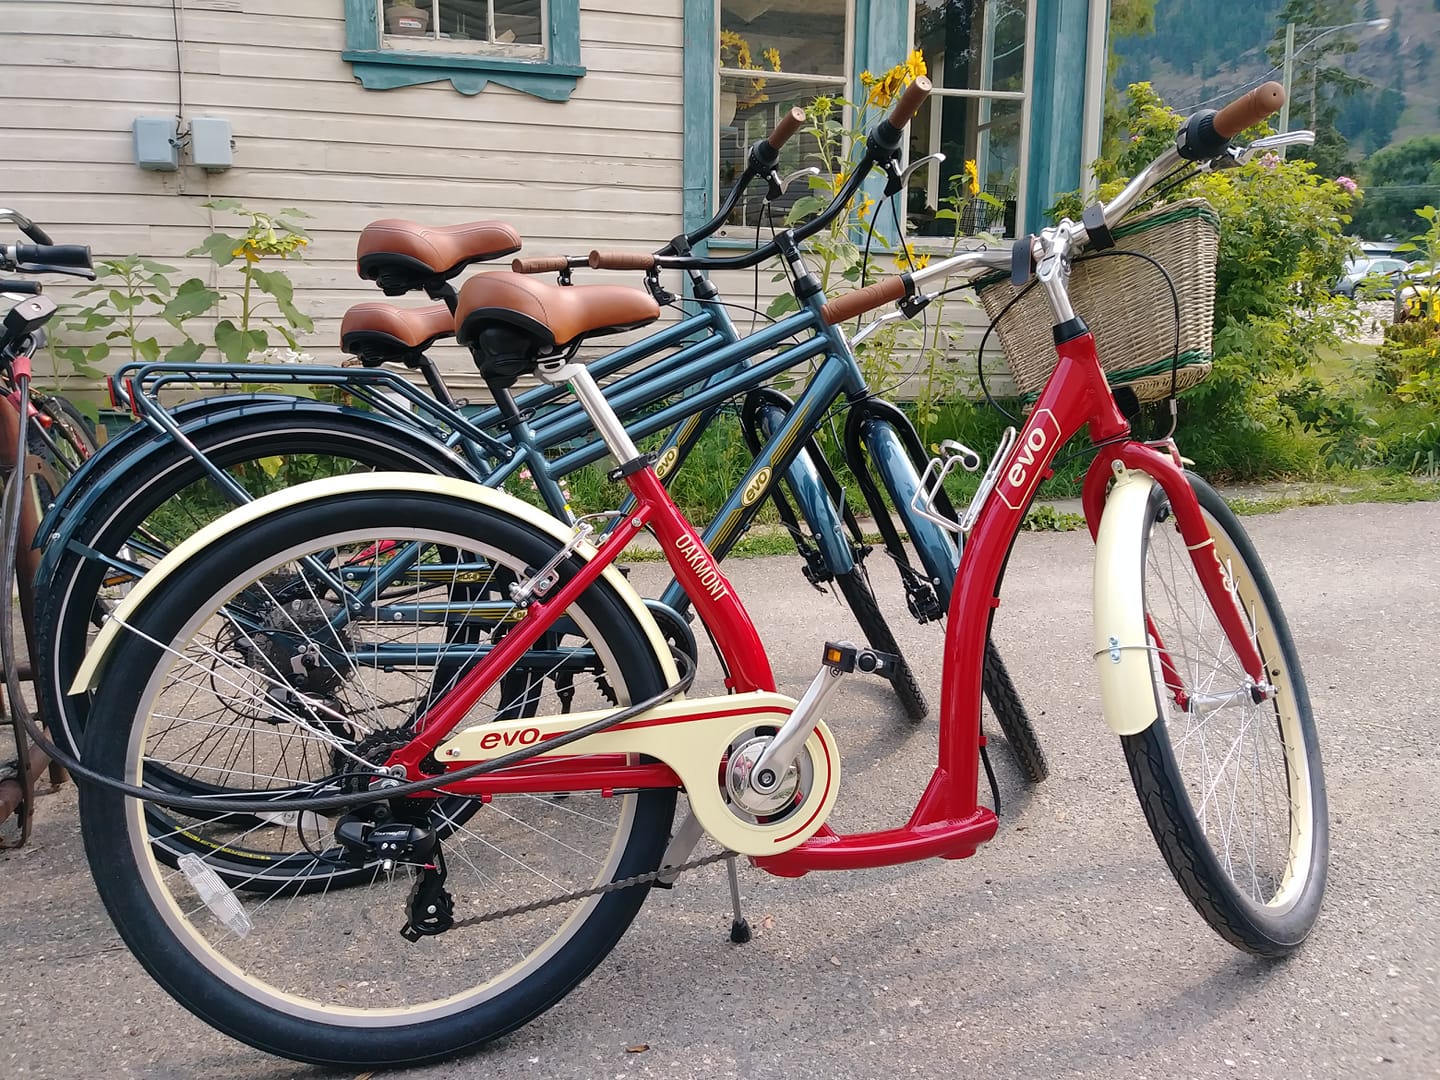 Sunflower Bicycle Repair: Sunflower Bicycle Repair is here to help you get your bike running. We exist to get more people riding bikes, and to keep bicycles from ending up in the landfill. […]